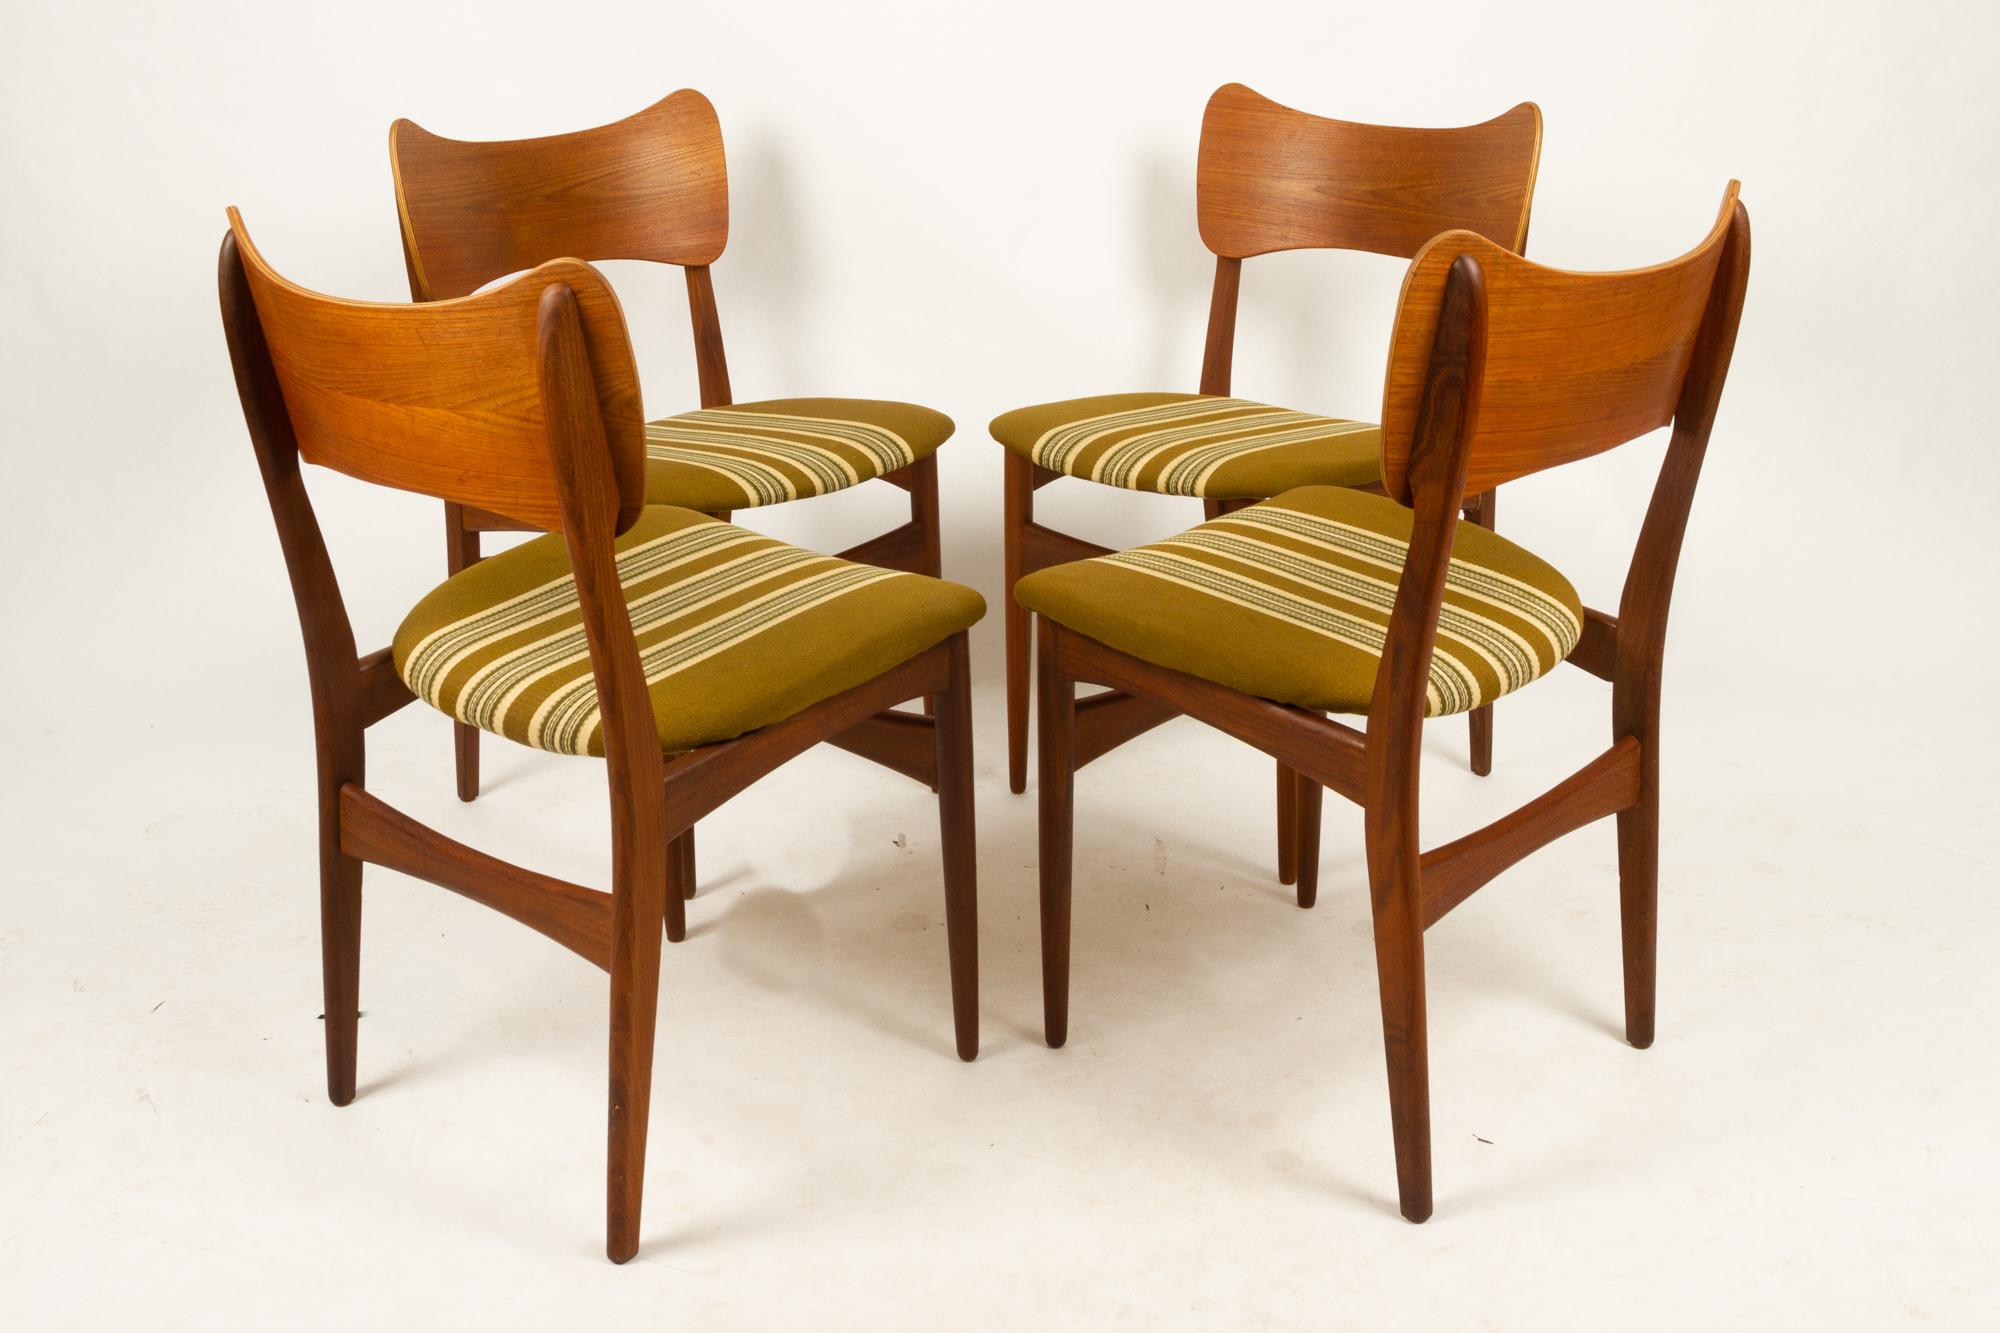 Vintage Danish teak dining chairs 1960s set of 4
Set of period typical Mid-Century Modern dining chairs with solid teak frames. Wide curved backrests in teak veneer. Rounded tapered legs and curved seat. Very comfortable. Original